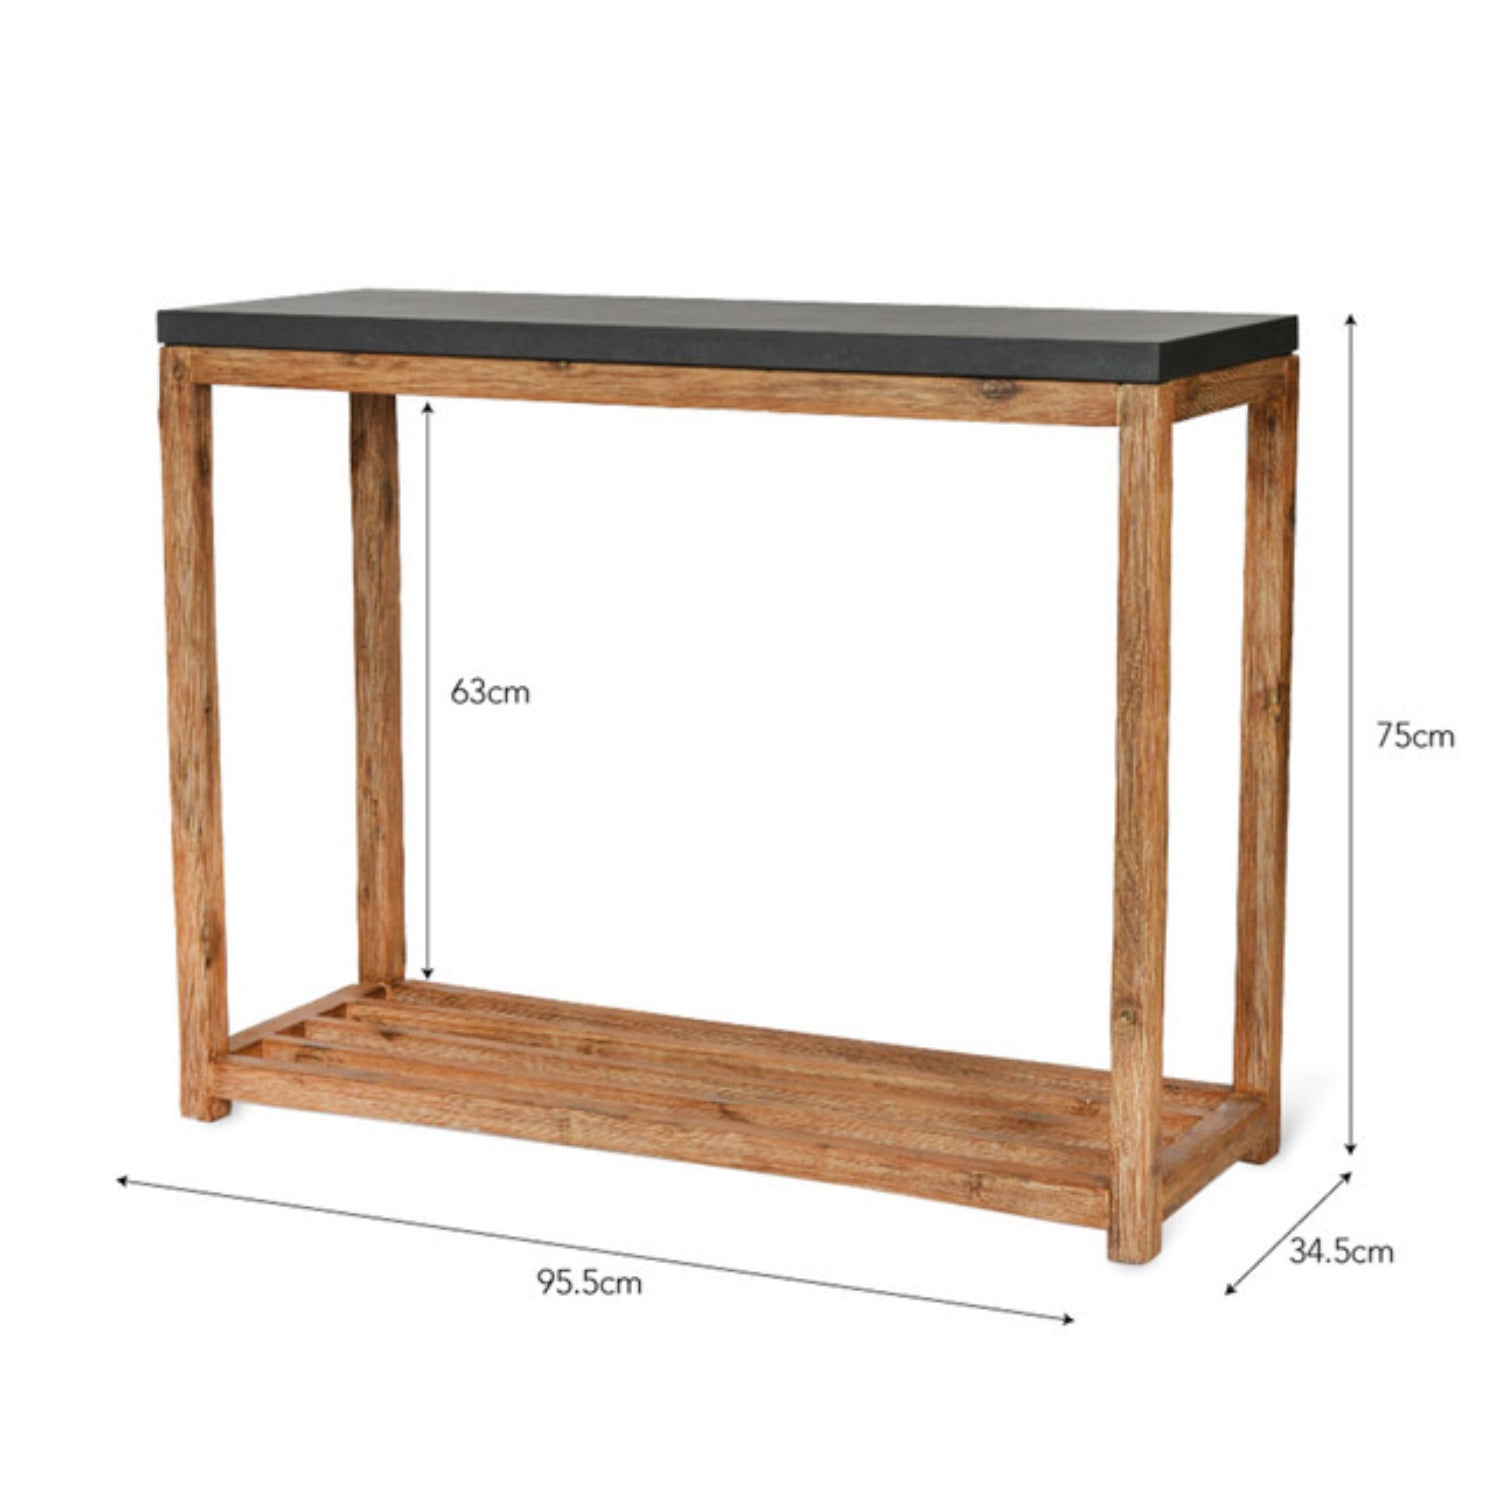 Chilson Console Large Table by Garden Trading- Cement Fibre